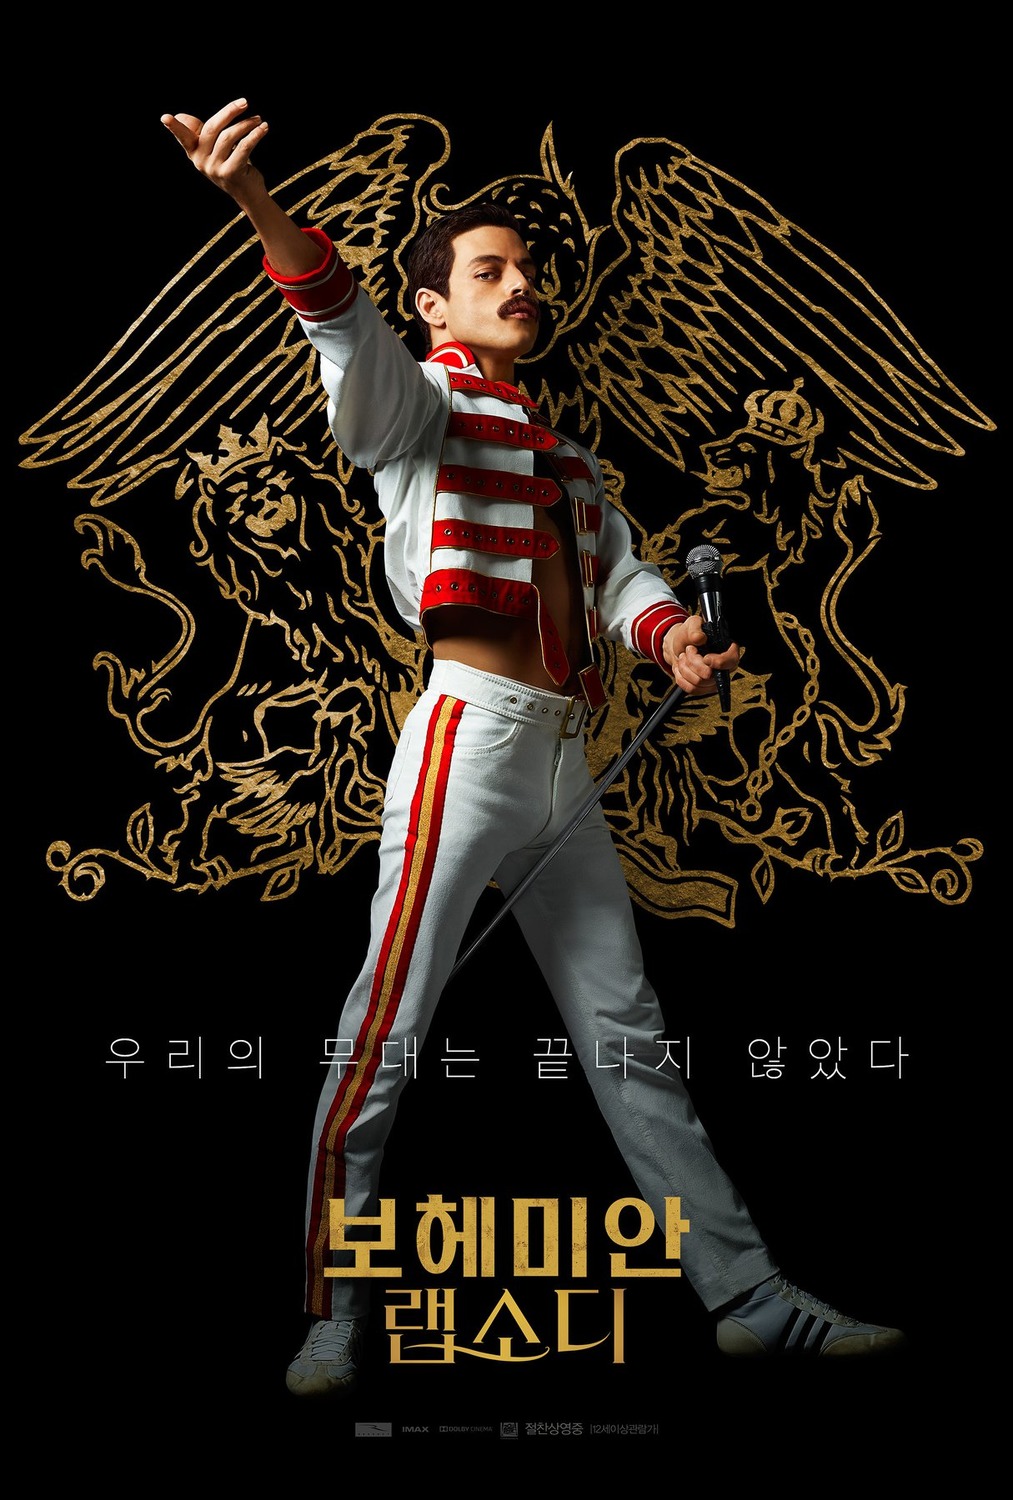 Extra Large Movie Poster Image for Bohemian Rhapsody (#12 of 12)